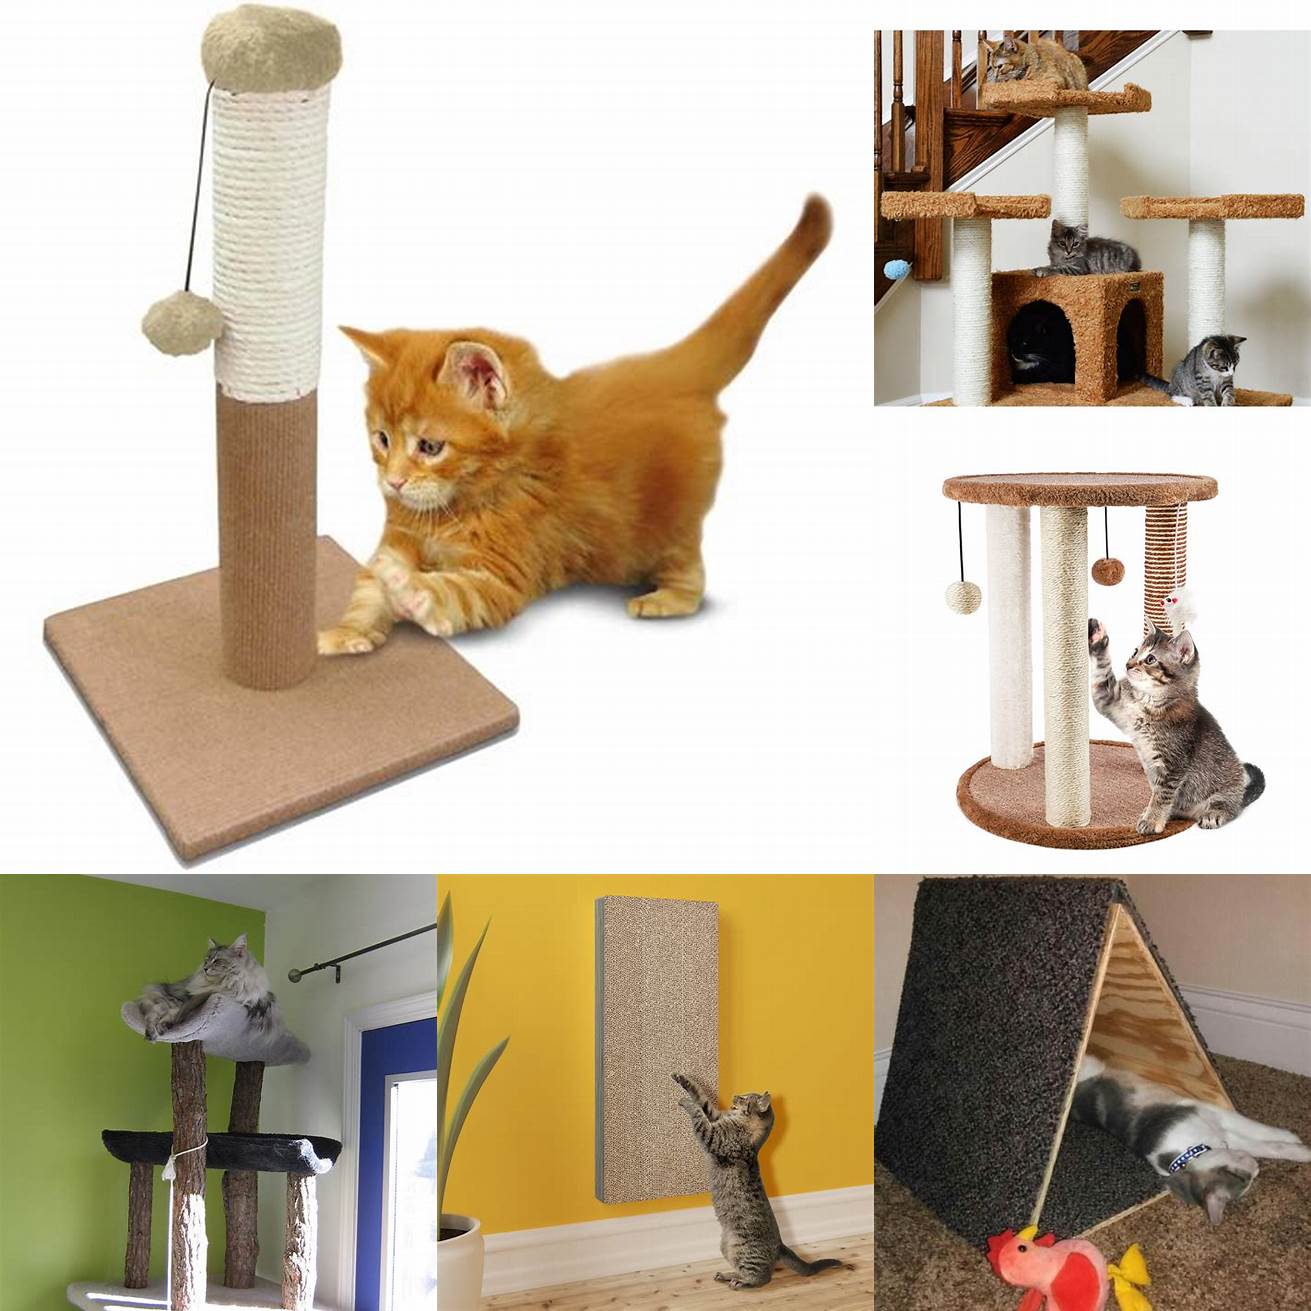 Provide plenty of environmental enrichment such as scratching posts toys and perches This can help reduce boredom and stress which can contribute to aggression